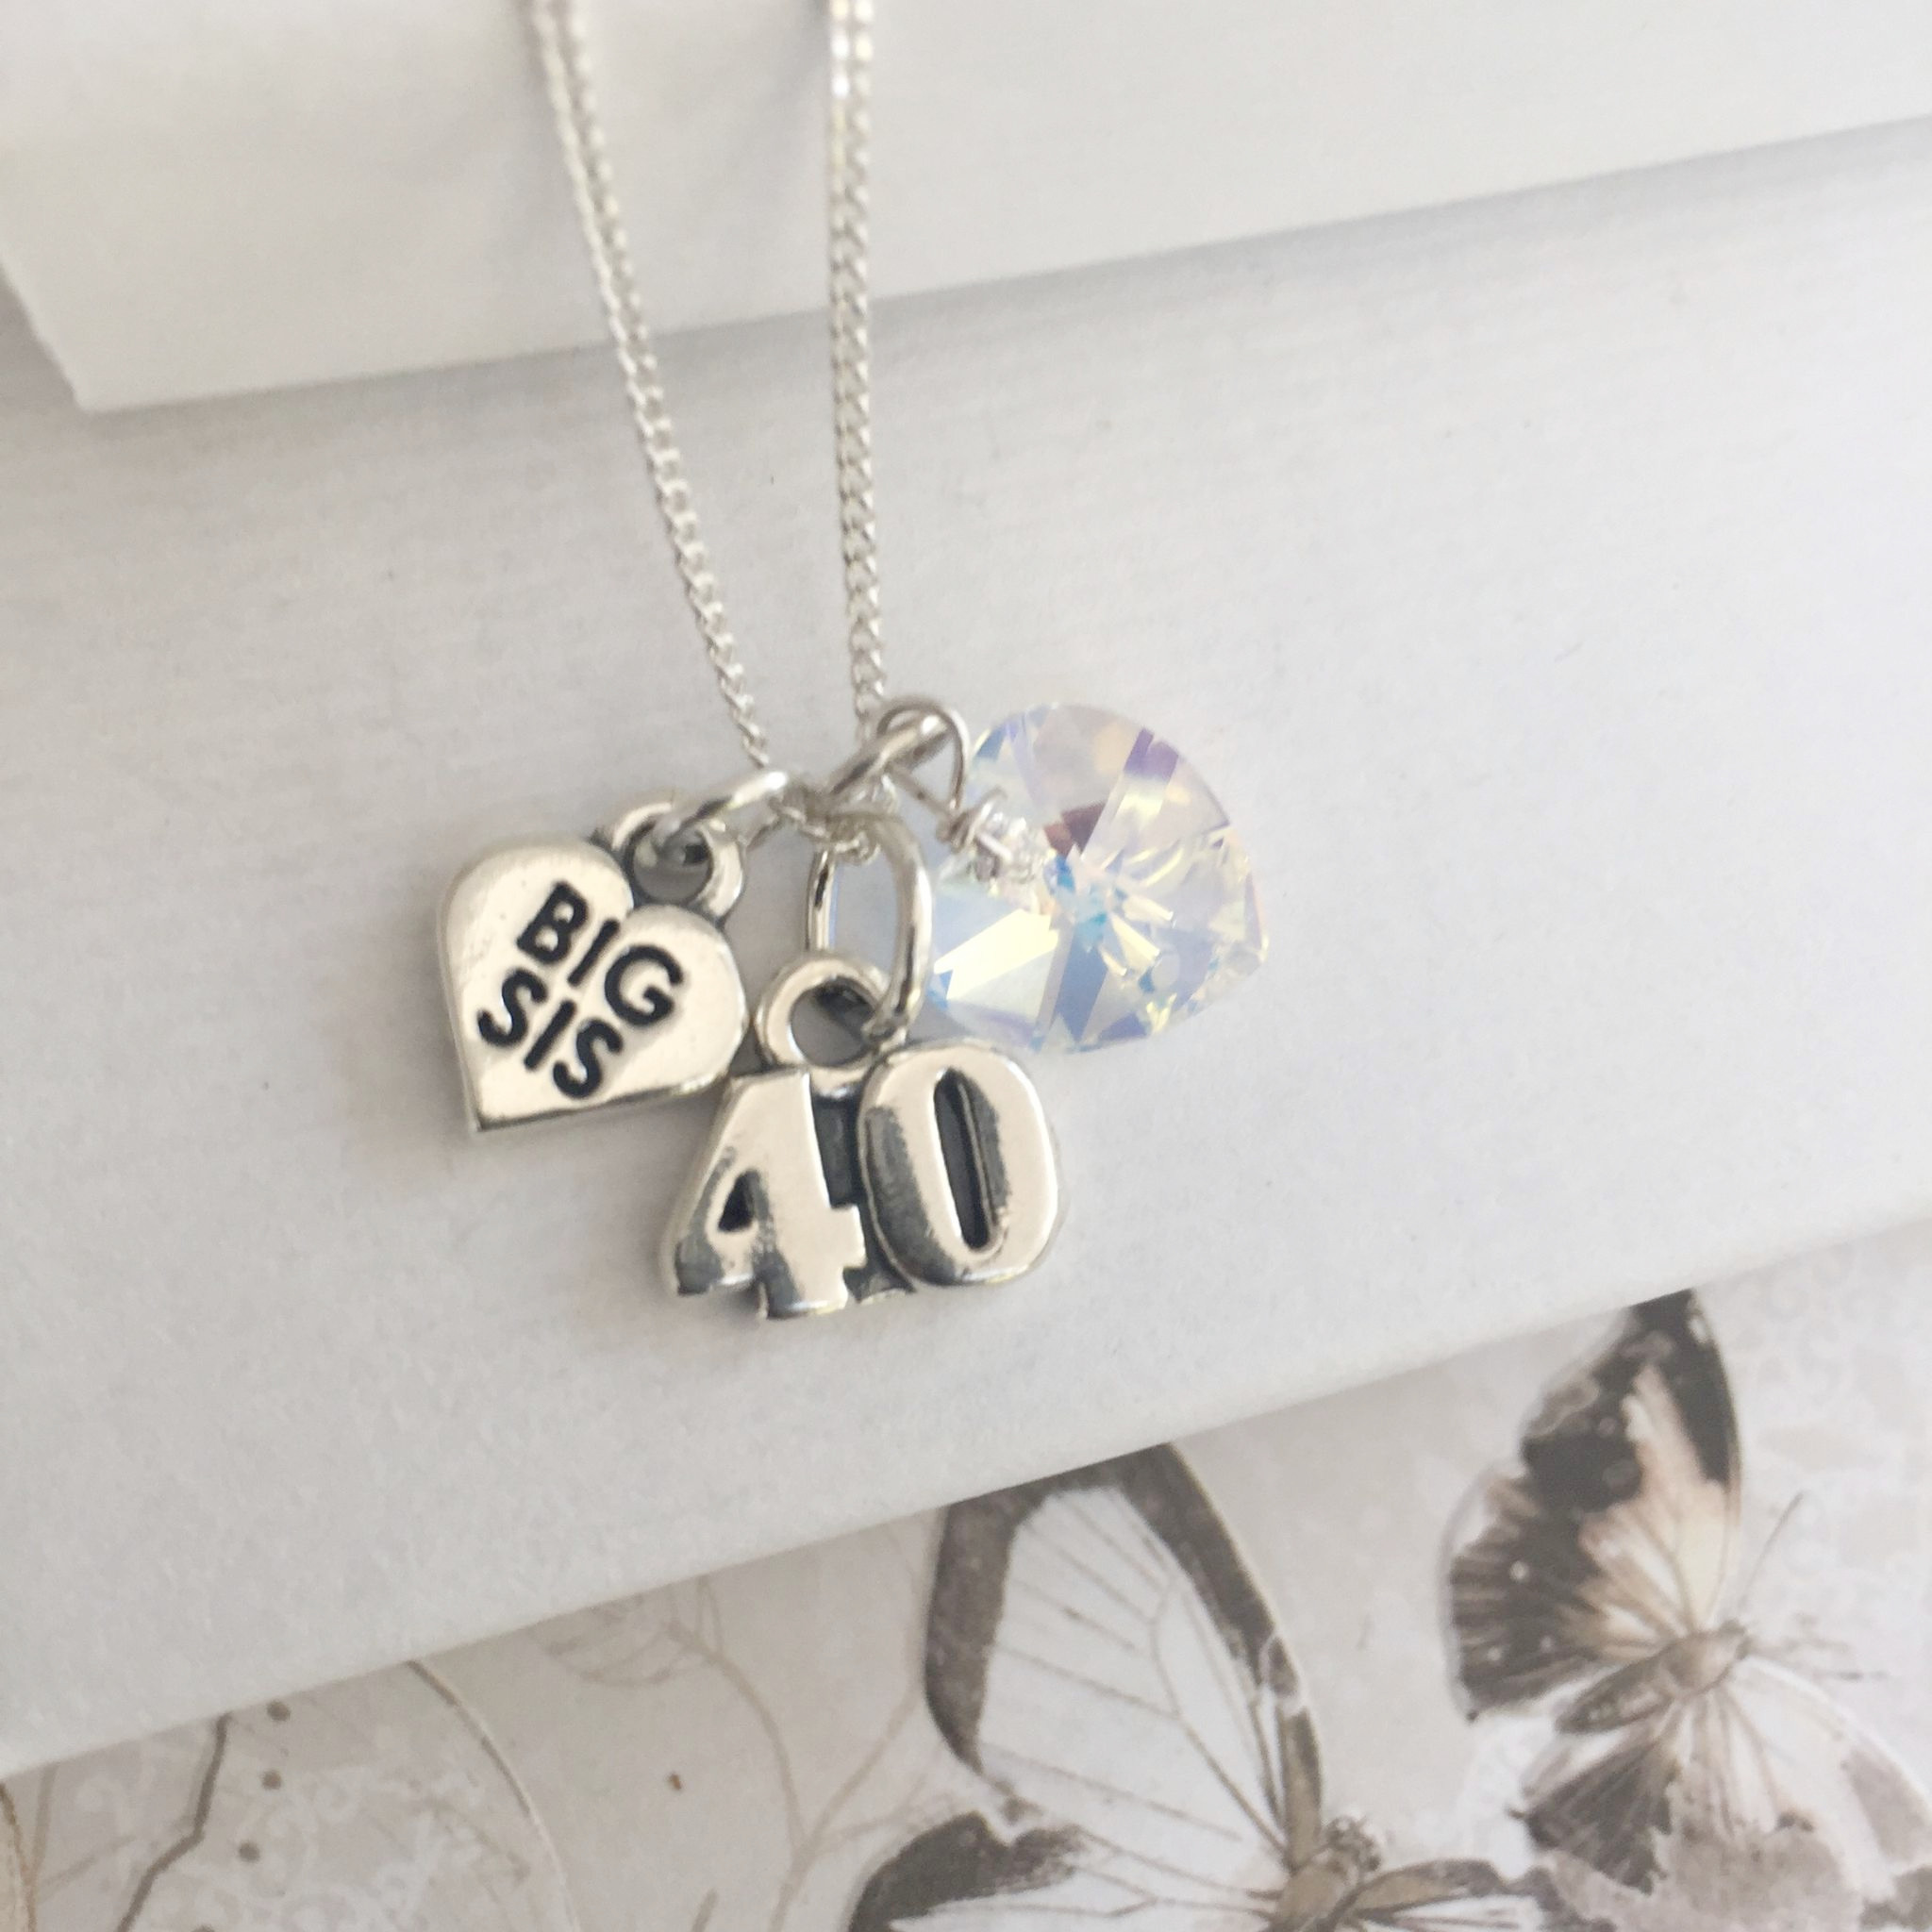 40th Birthday Gift Ideas For Sister
 20 the Best Ideas for 40th Birthday Gift Ideas for